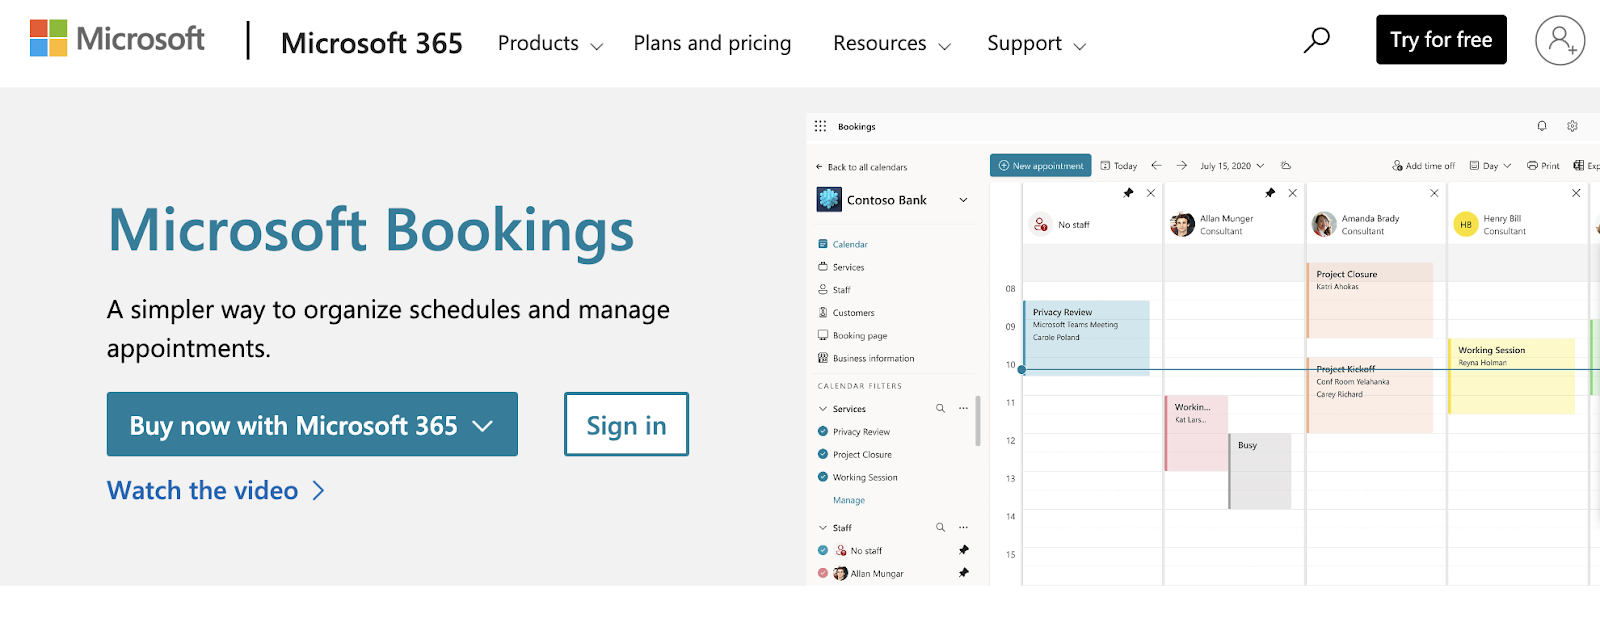 MS Bookings overview